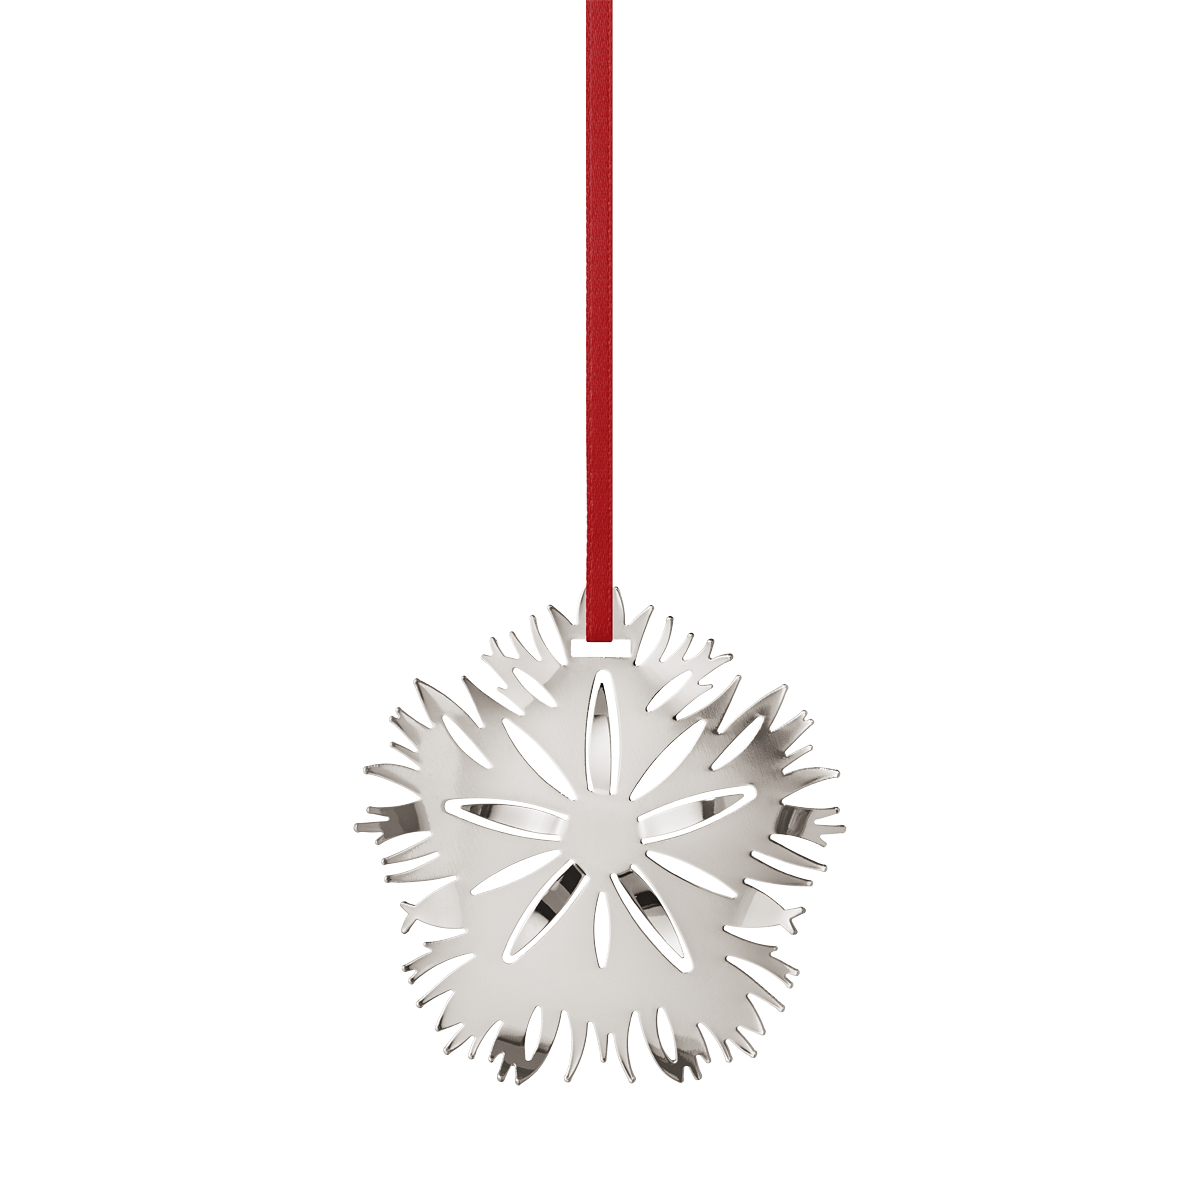 Bauble Silver Christmas HQ Image Free PNG Image